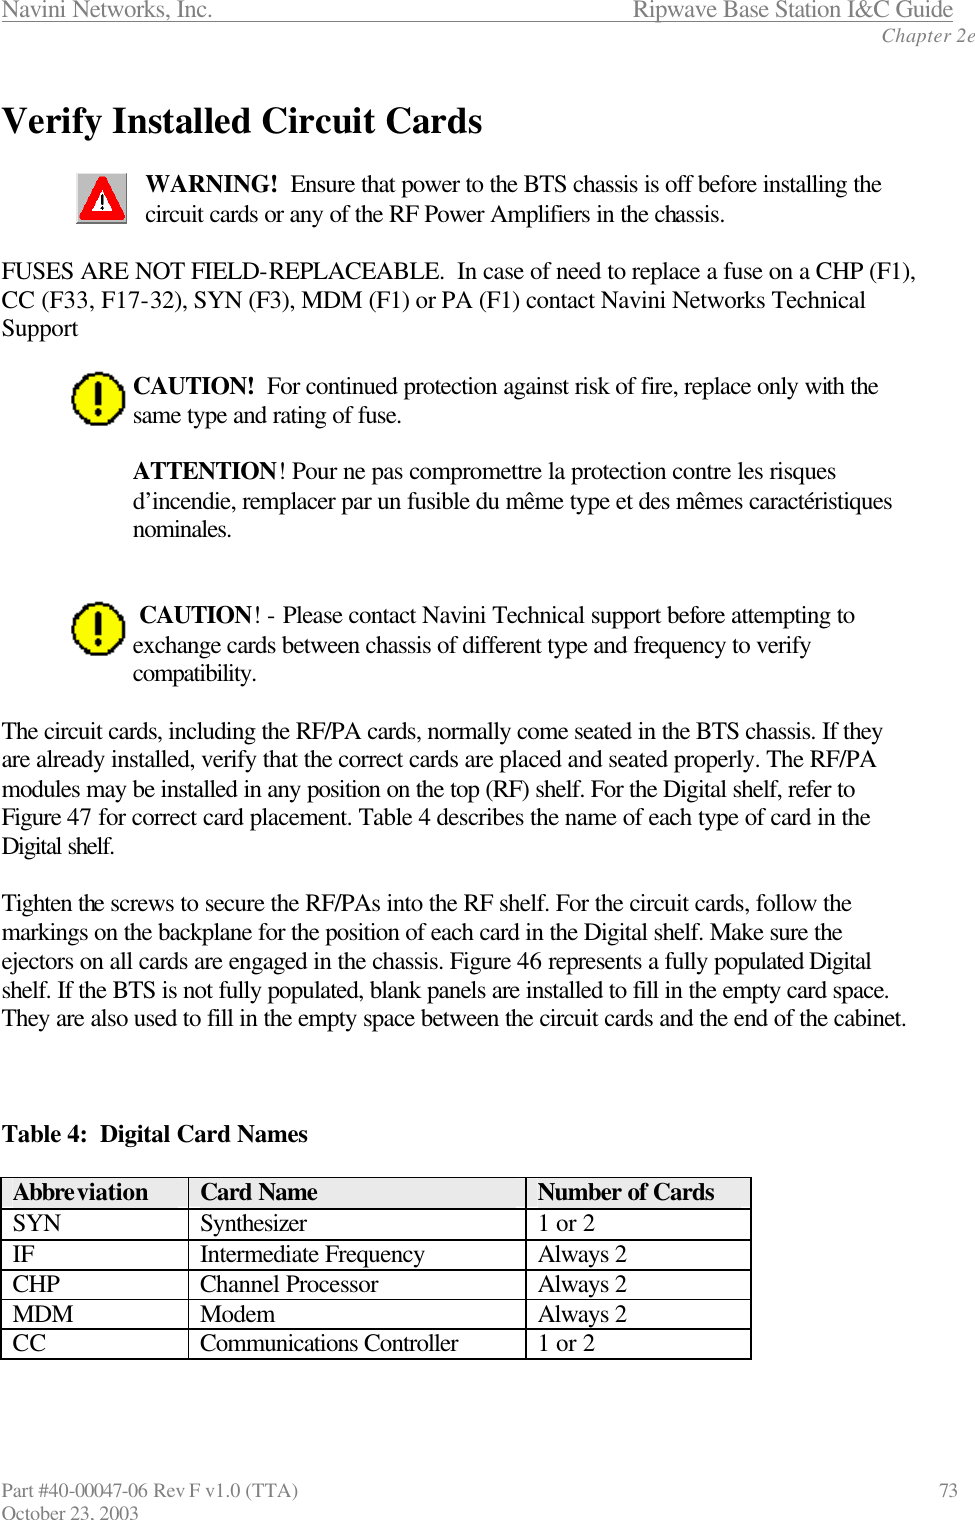 Navini Networks, Inc.                      Ripwave Base Station I&amp;C Guide Chapter 2e Part #40-00047-06 Rev F v1.0 (TTA)                             73 October 23, 2003  Verify Installed Circuit Cards  WARNING!  Ensure that power to the BTS chassis is off before installing the circuit cards or any of the RF Power Amplifiers in the chassis.  FUSES ARE NOT FIELD-REPLACEABLE.  In case of need to replace a fuse on a CHP (F1), CC (F33, F17-32), SYN (F3), MDM (F1) or PA (F1) contact Navini Networks Technical Support   CAUTION!  For continued protection against risk of fire, replace only with the same type and rating of fuse.  ATTENTION! Pour ne pas compromettre la protection contre les risques d’incendie, remplacer par un fusible du même type et des mêmes caractéristiques nominales.    CAUTION! - Please contact Navini Technical support before attempting to exchange cards between chassis of different type and frequency to verify compatibility.  The circuit cards, including the RF/PA cards, normally come seated in the BTS chassis. If they are already installed, verify that the correct cards are placed and seated properly. The RF/PA modules may be installed in any position on the top (RF) shelf. For the Digital shelf, refer to Figure 47 for correct card placement. Table 4 describes the name of each type of card in the Digital shelf.  Tighten the screws to secure the RF/PAs into the RF shelf. For the circuit cards, follow the markings on the backplane for the position of each card in the Digital shelf. Make sure the ejectors on all cards are engaged in the chassis. Figure 46 represents a fully populated Digital shelf. If the BTS is not fully populated, blank panels are installed to fill in the empty card space. They are also used to fill in the empty space between the circuit cards and the end of the cabinet.    Table 4:  Digital Card Names  Abbreviation Card Name Number of Cards SYN Synthesizer  1 or 2 IF Intermediate Frequency Always 2 CHP Channel Processor Always 2 MDM Modem  Always 2 CC Communications Controller 1 or 2      